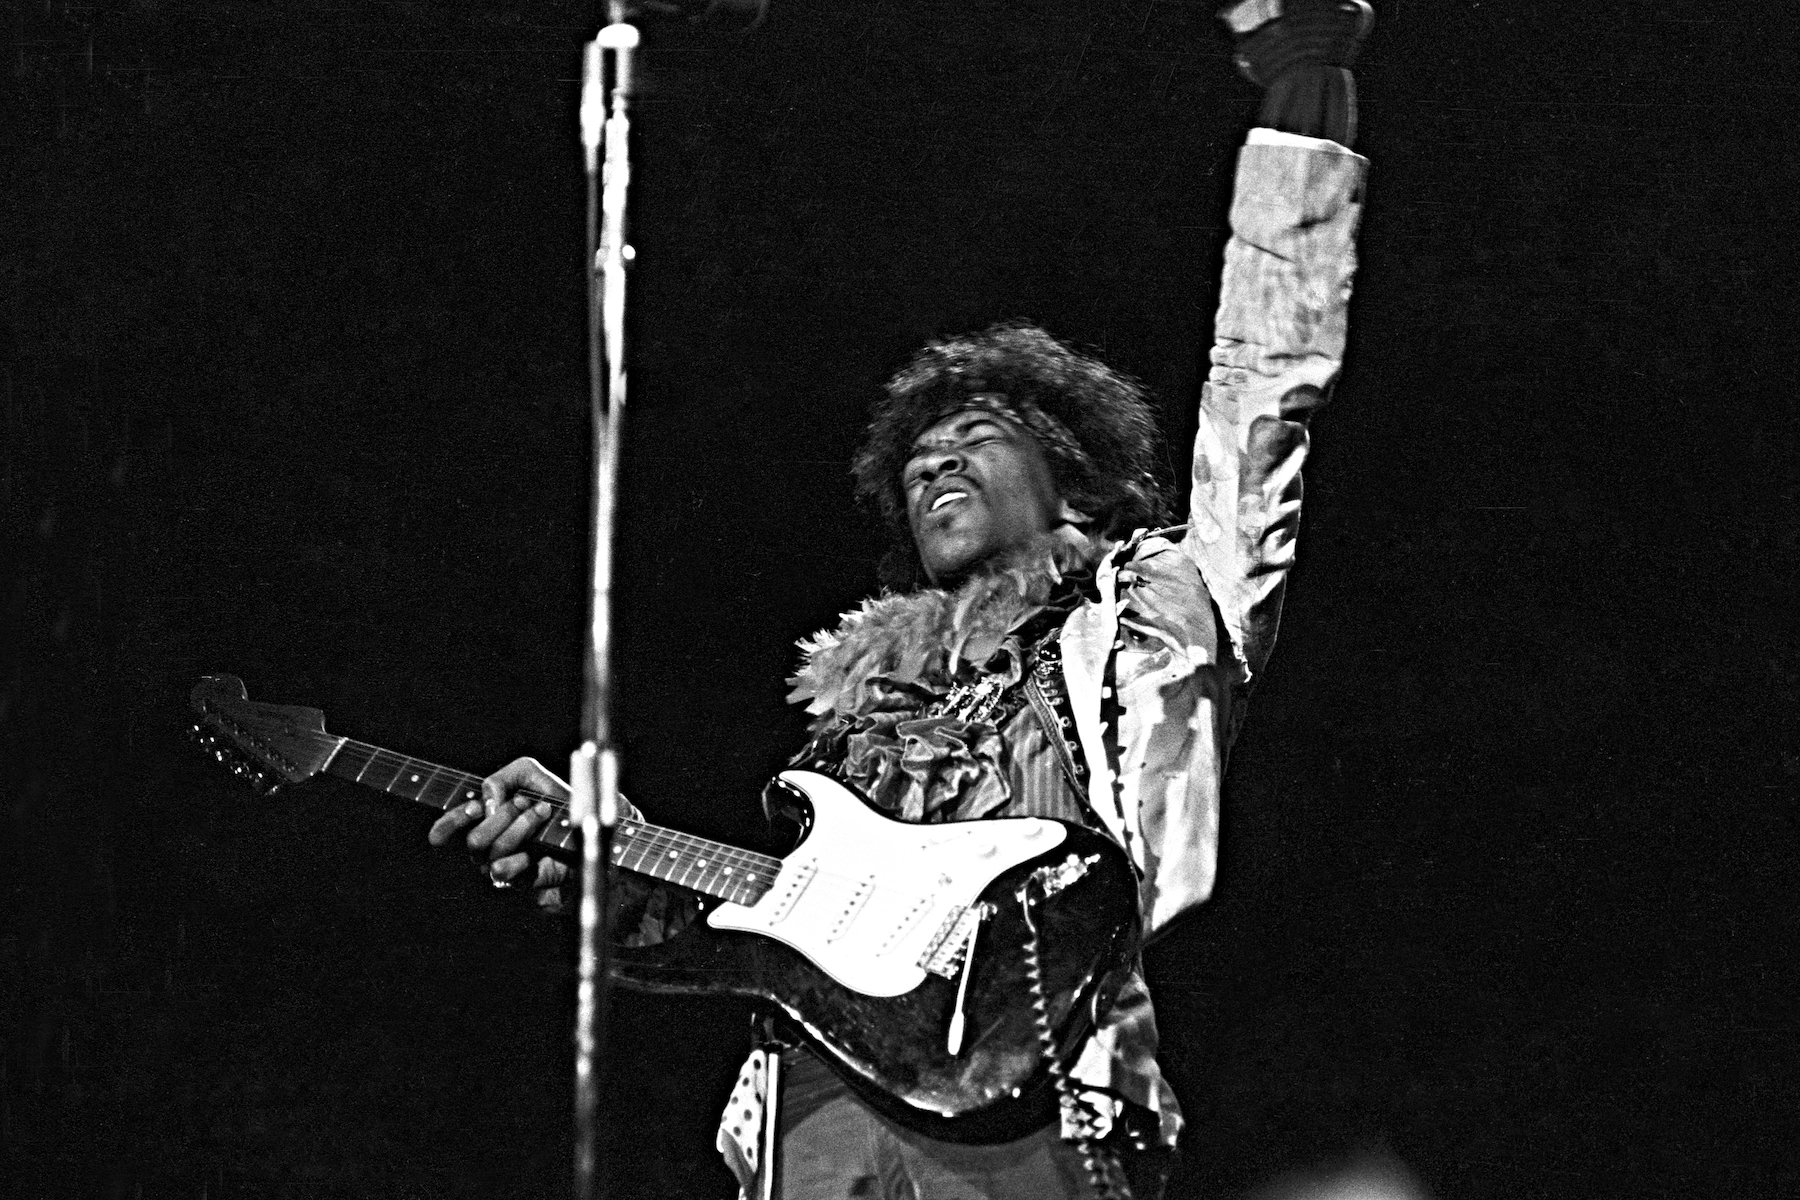 Jimi Hendrix performs during the Monterey Pop Festival in 1967